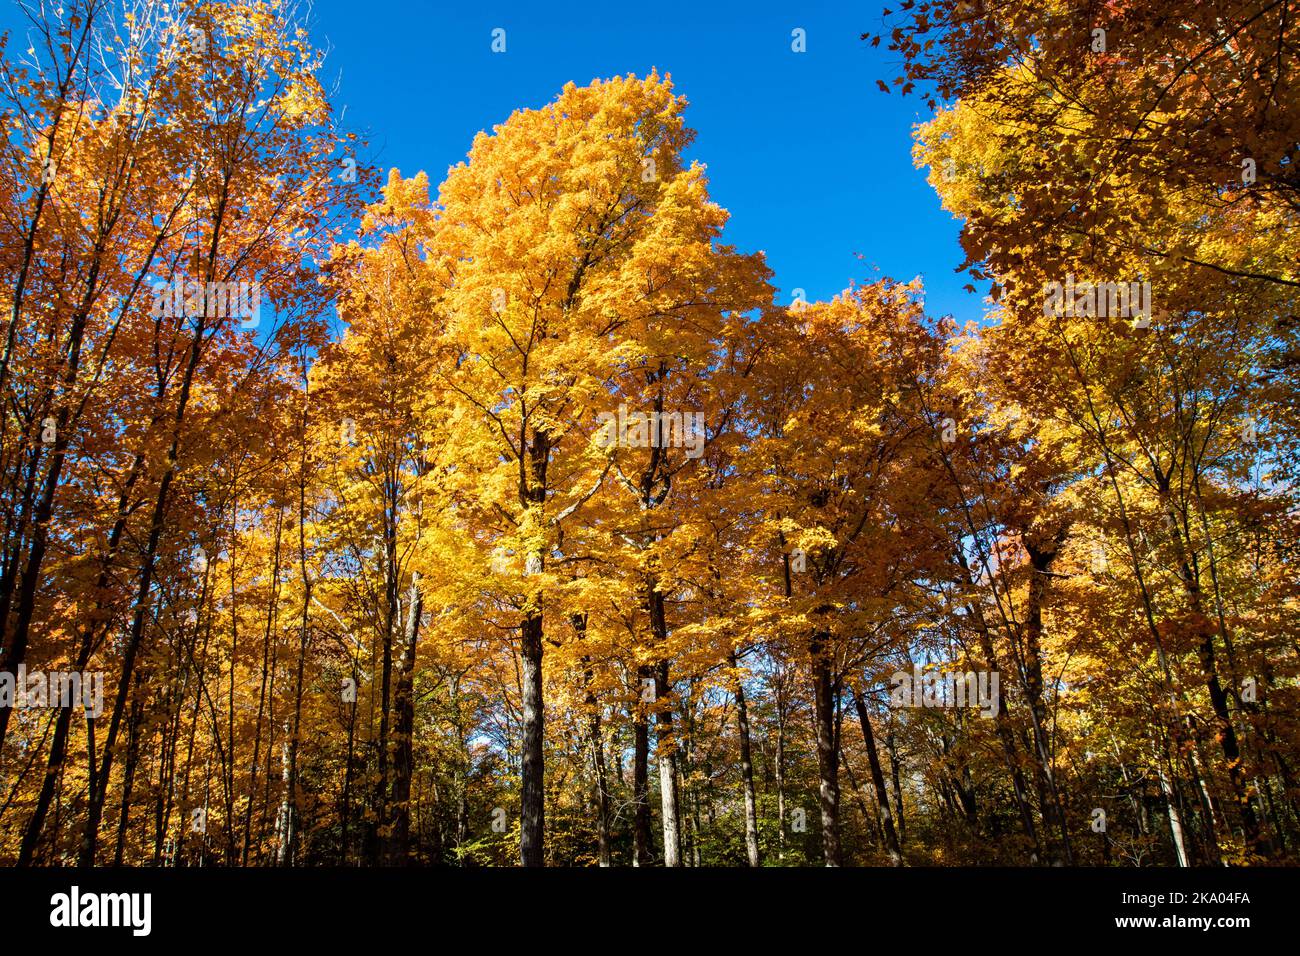 Autumn trees in Wisconsin with a blue sky, horizontal Stock Photo